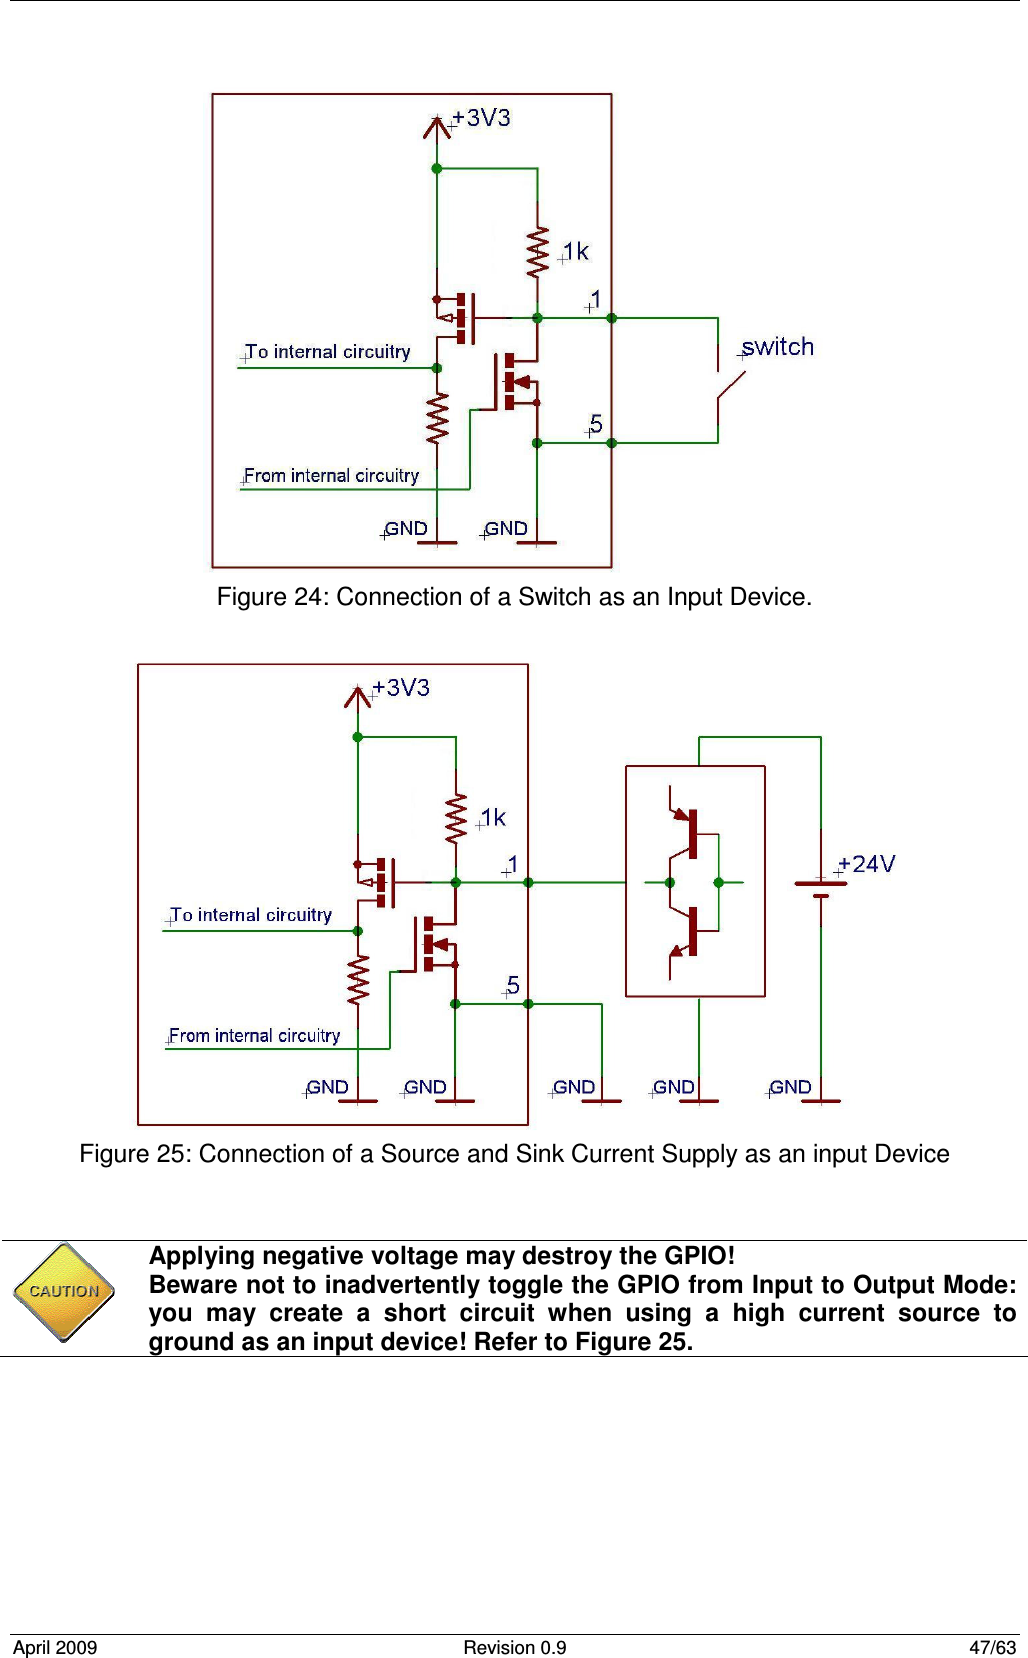  April 2009  Revision 0.9  47/63  Figure 24: Connection of a Switch as an Input Device.   Figure 25: Connection of a Source and Sink Current Supply as an input Device     Applying negative voltage may destroy the GPIO! Beware not to inadvertently toggle the GPIO from Input to Output Mode: you  may  create  a  short  circuit  when  using  a  high  current  source  to ground as an input device! Refer to Figure 25. 